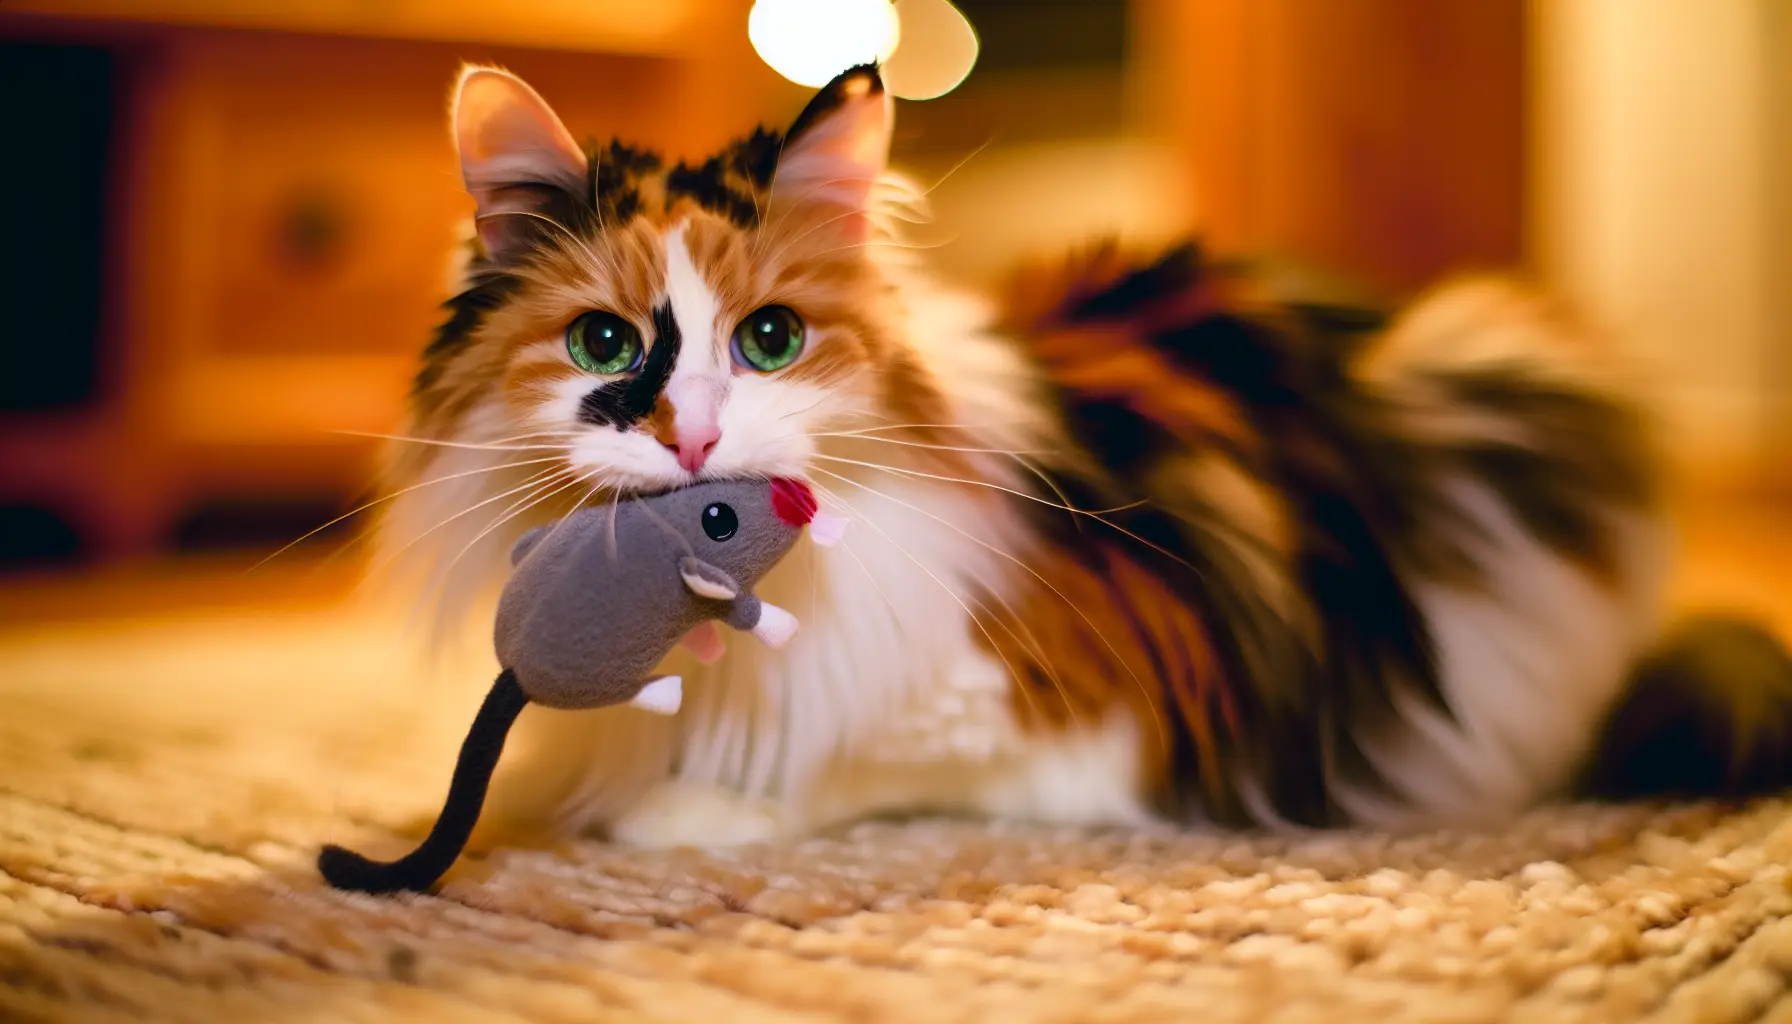 Cat meowing with toy in mouth